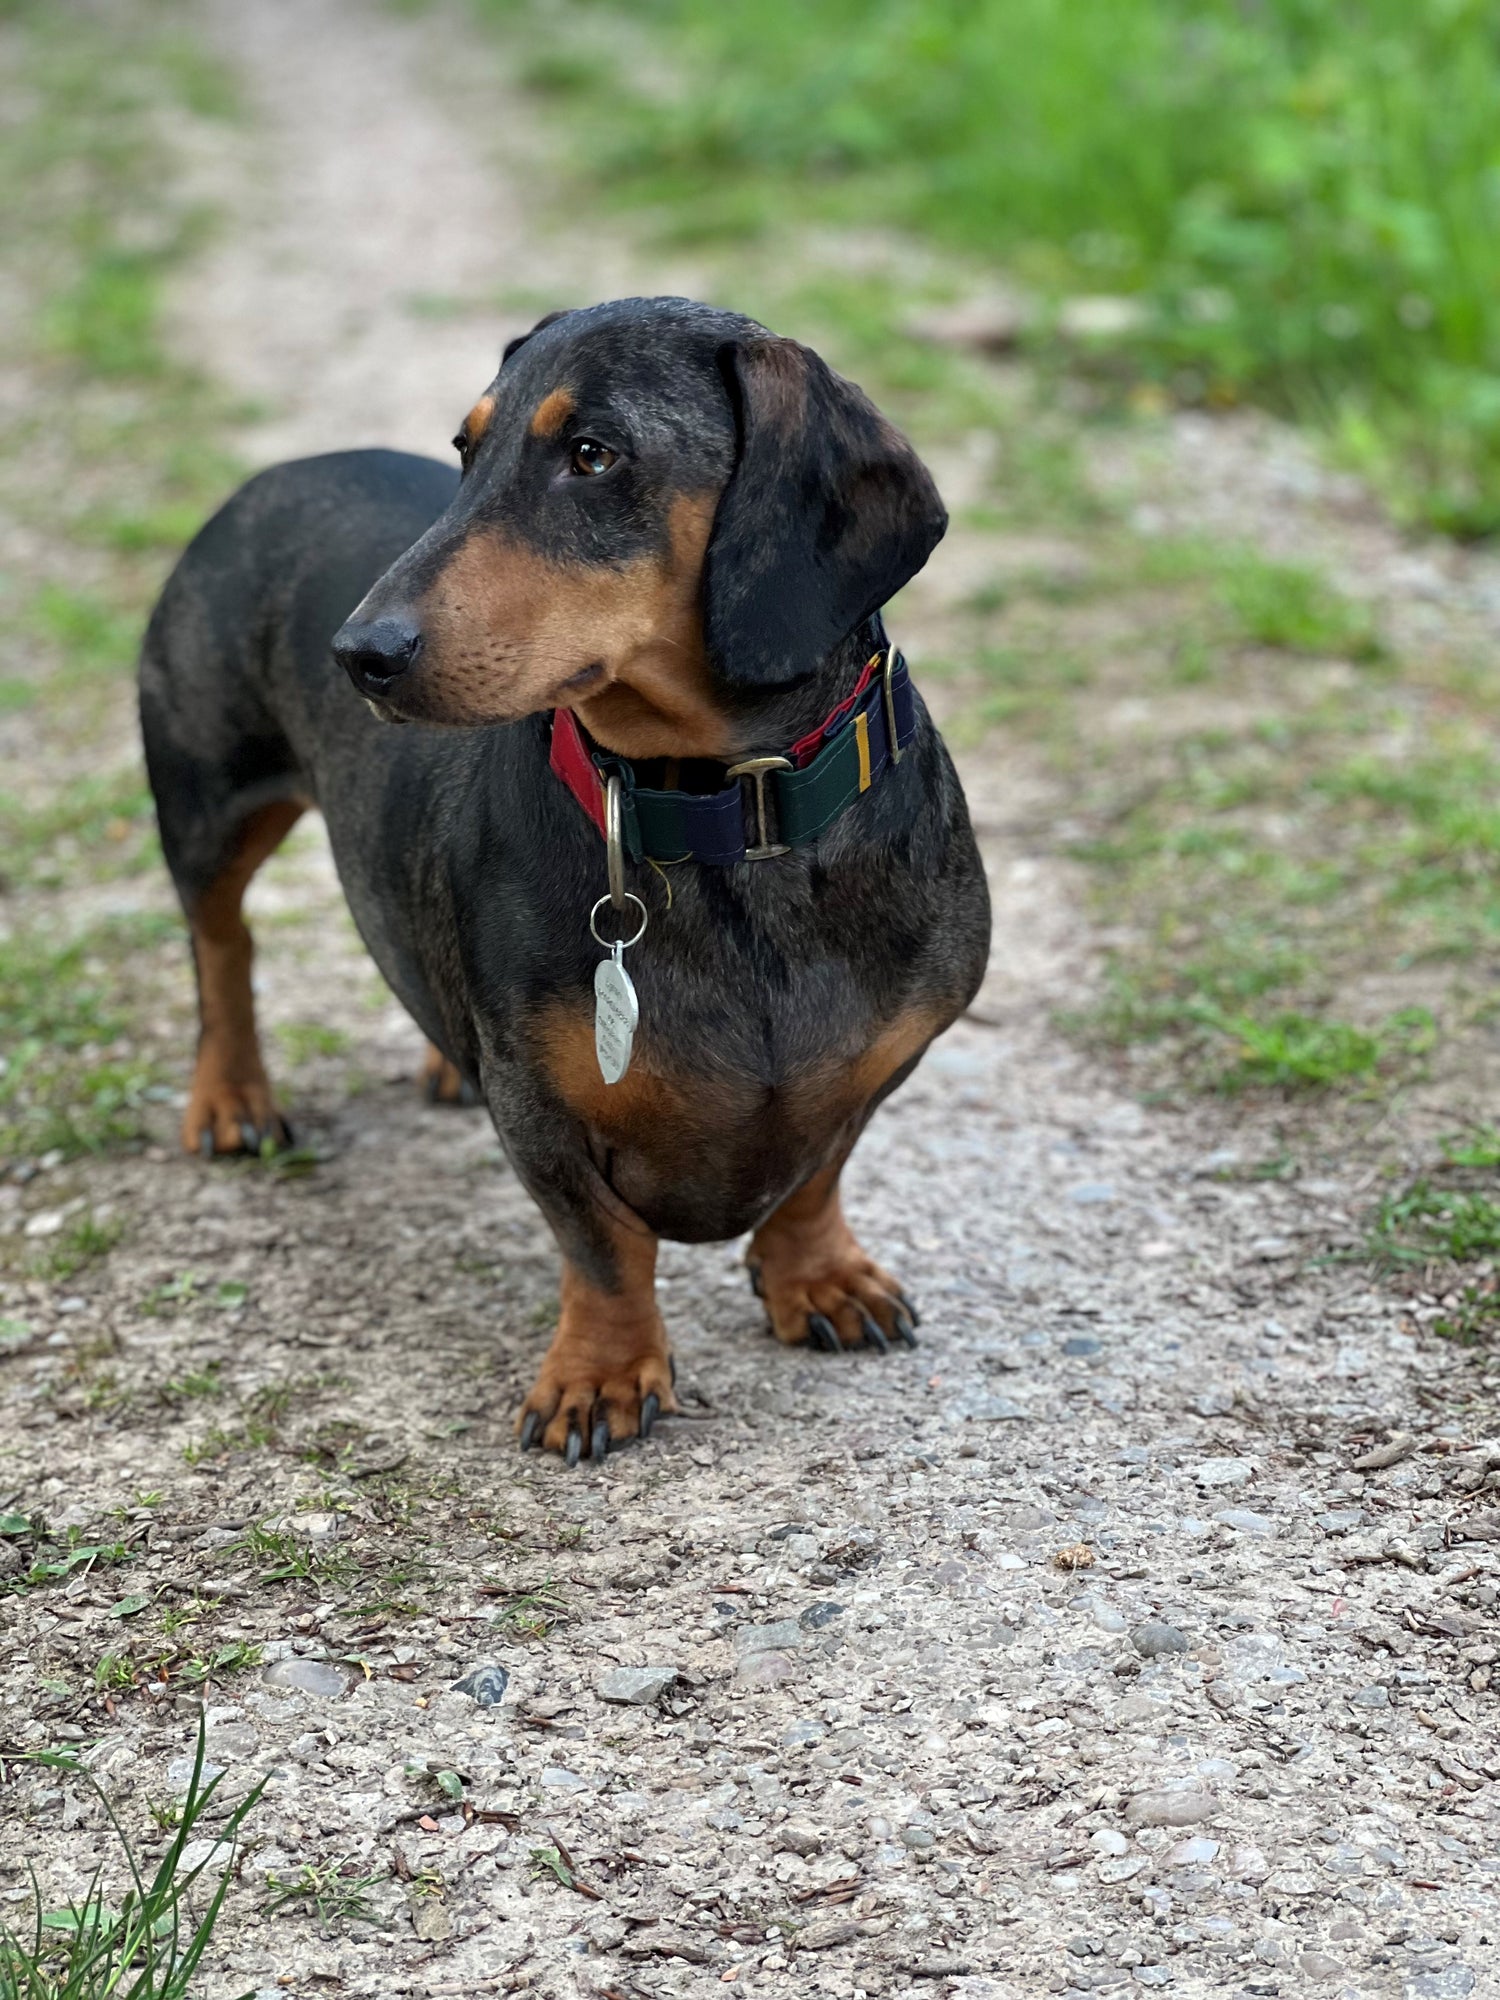 Dapple dachshund stood in the countryside during the summer with a stripe martingale collar